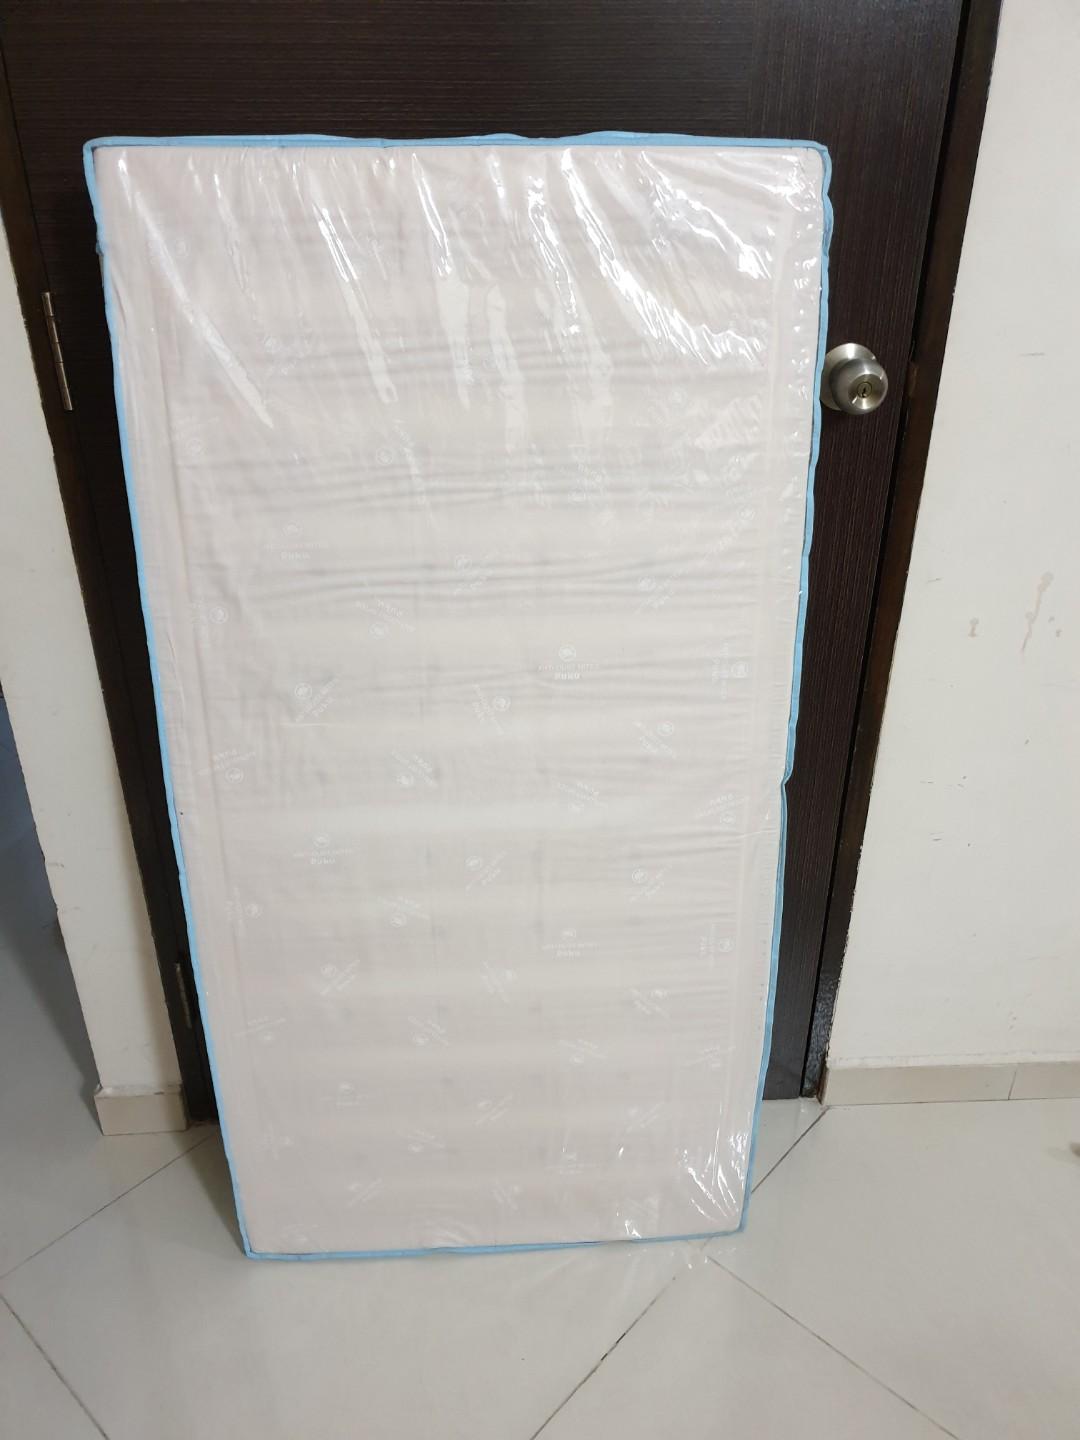 plastic cover for baby mattress